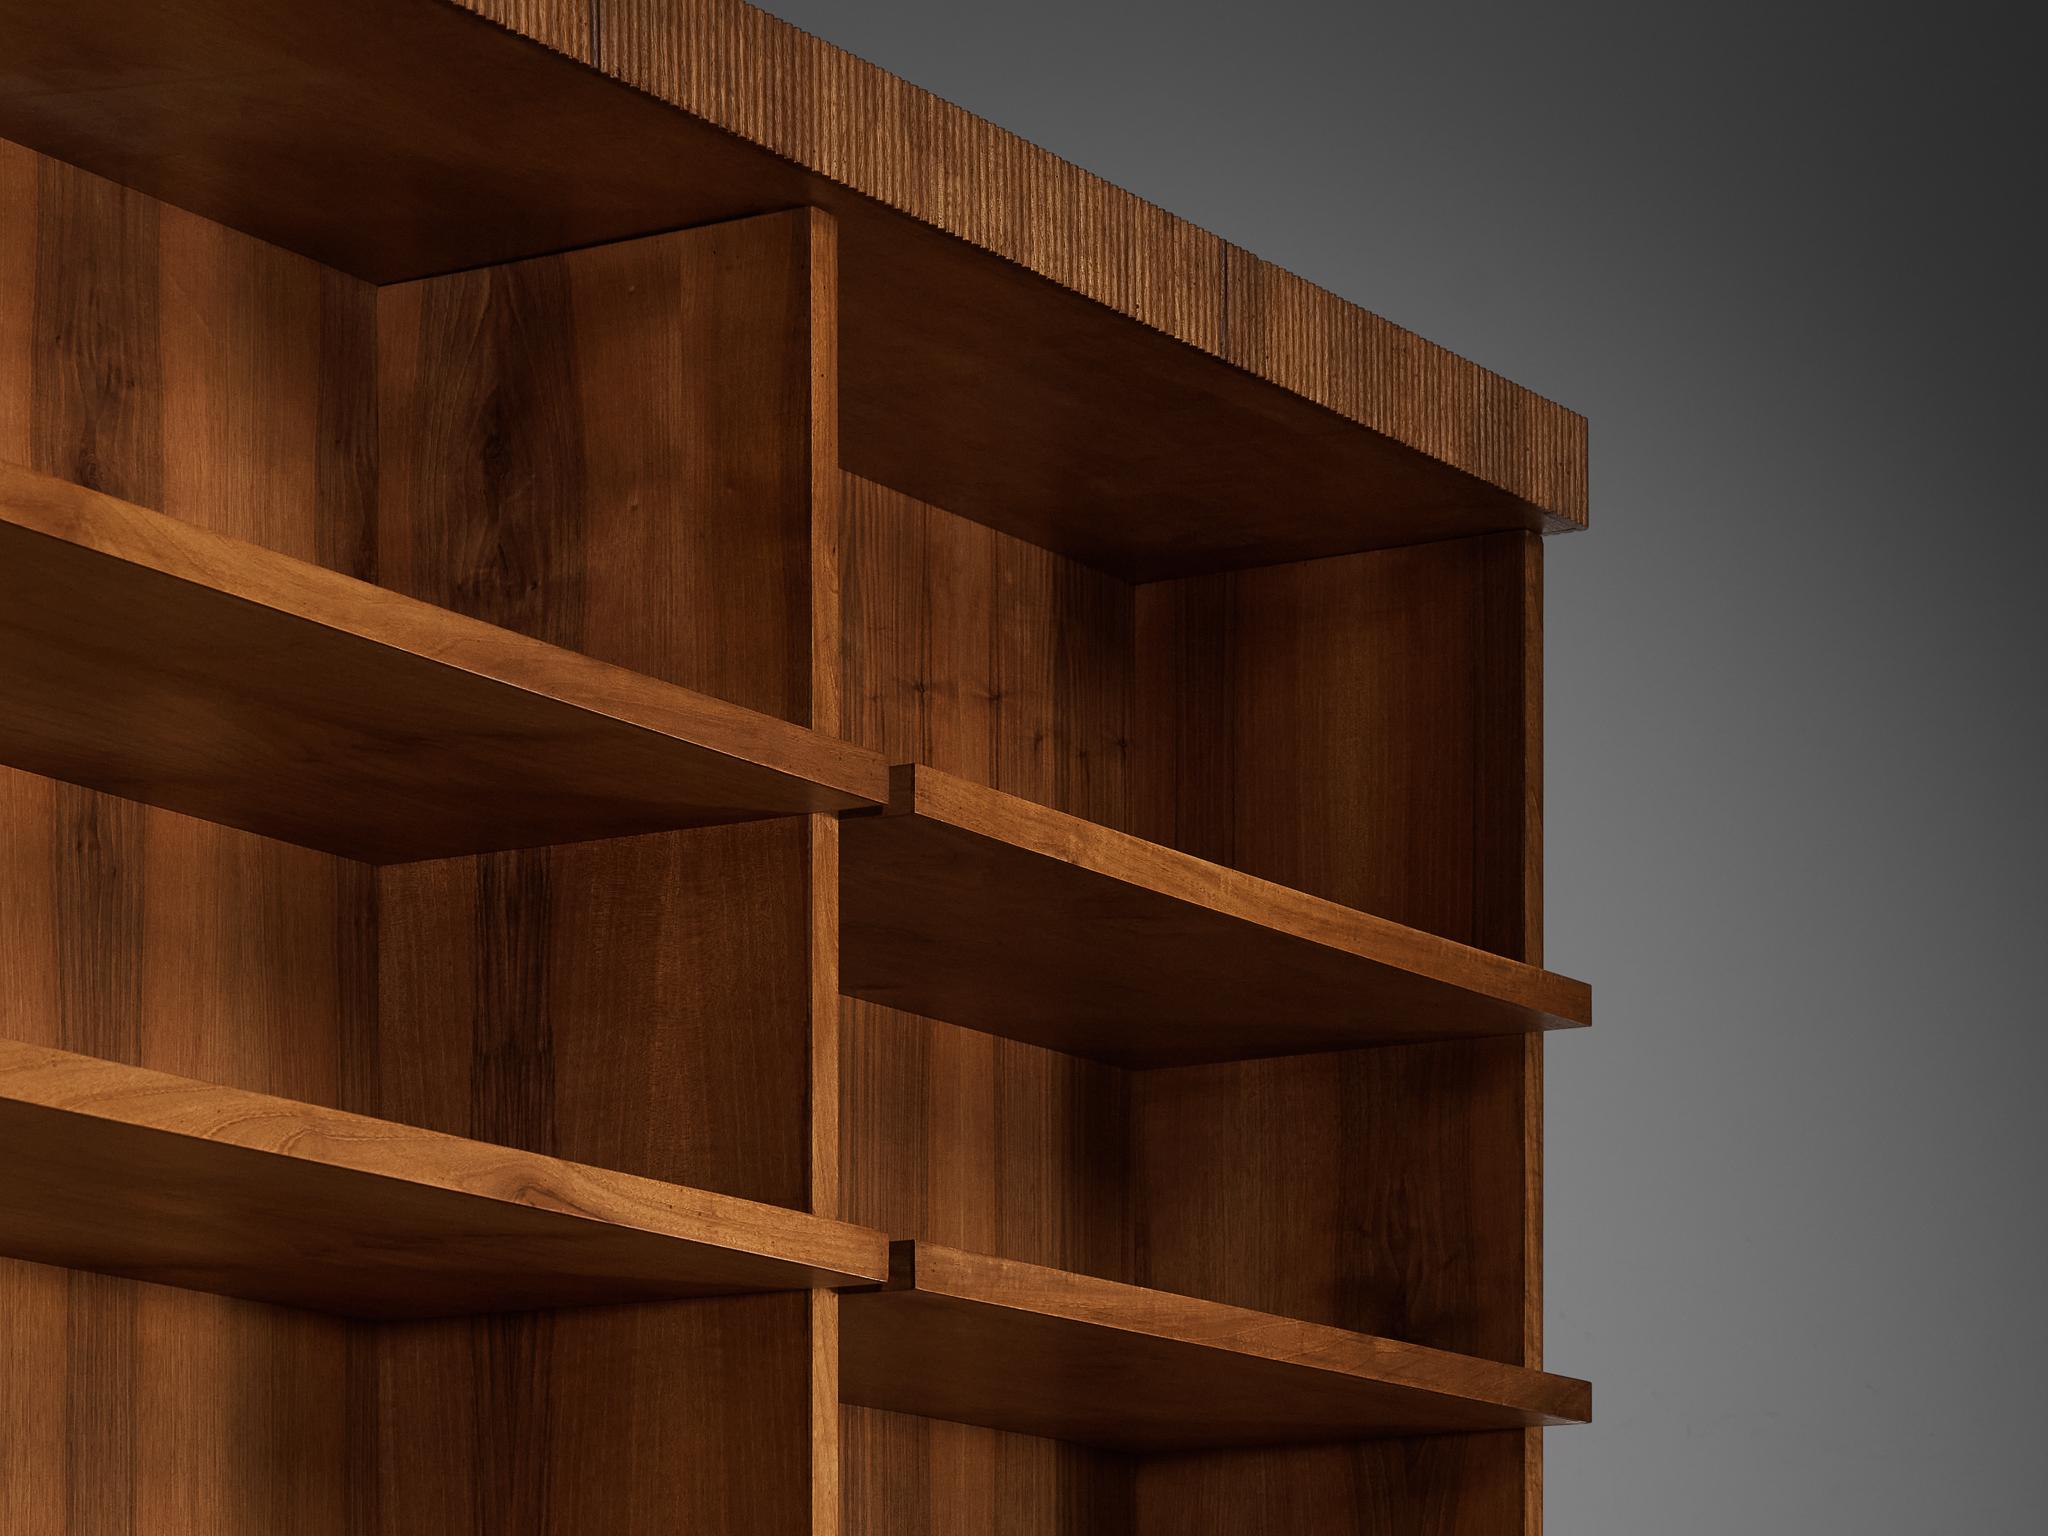 Large Italian Bookcase in Walnut, Cherry, and Grasscloth For Sale 11